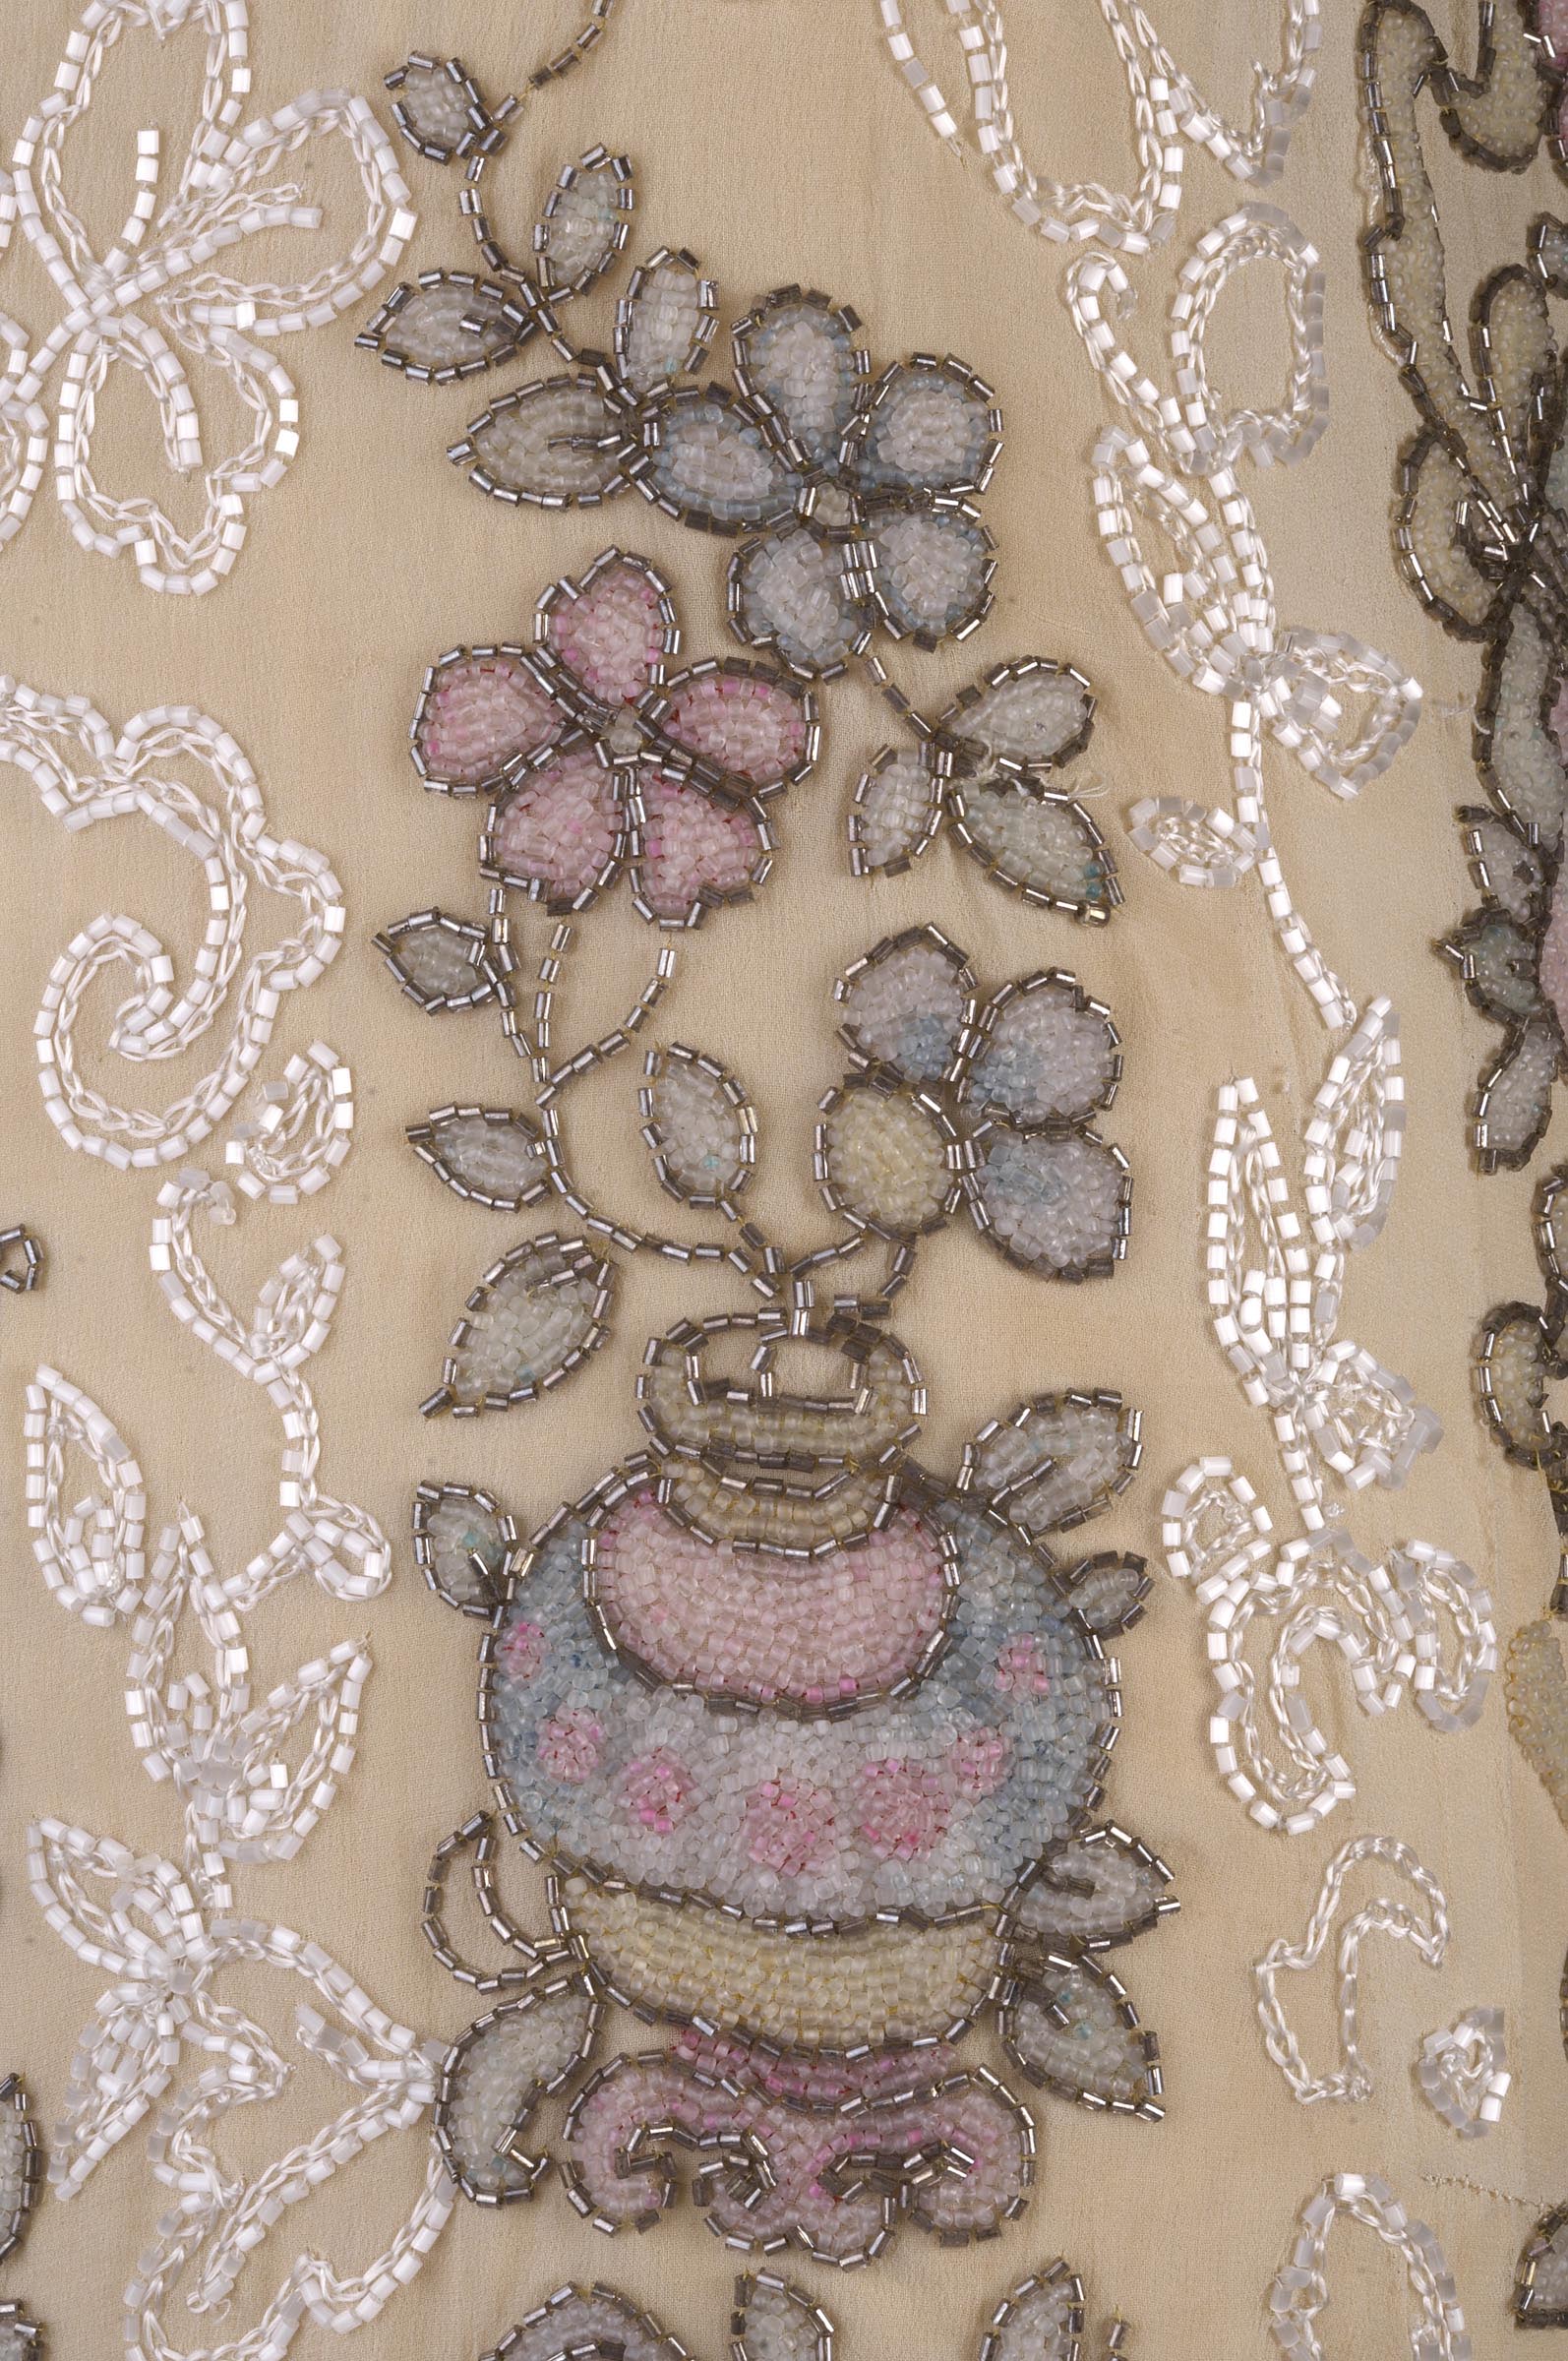 Glass bead embroidery from an evening gown by Premet, mid 1920s Images copyright: The Olive Matthews Collection, Chertsey Museum; Photograph